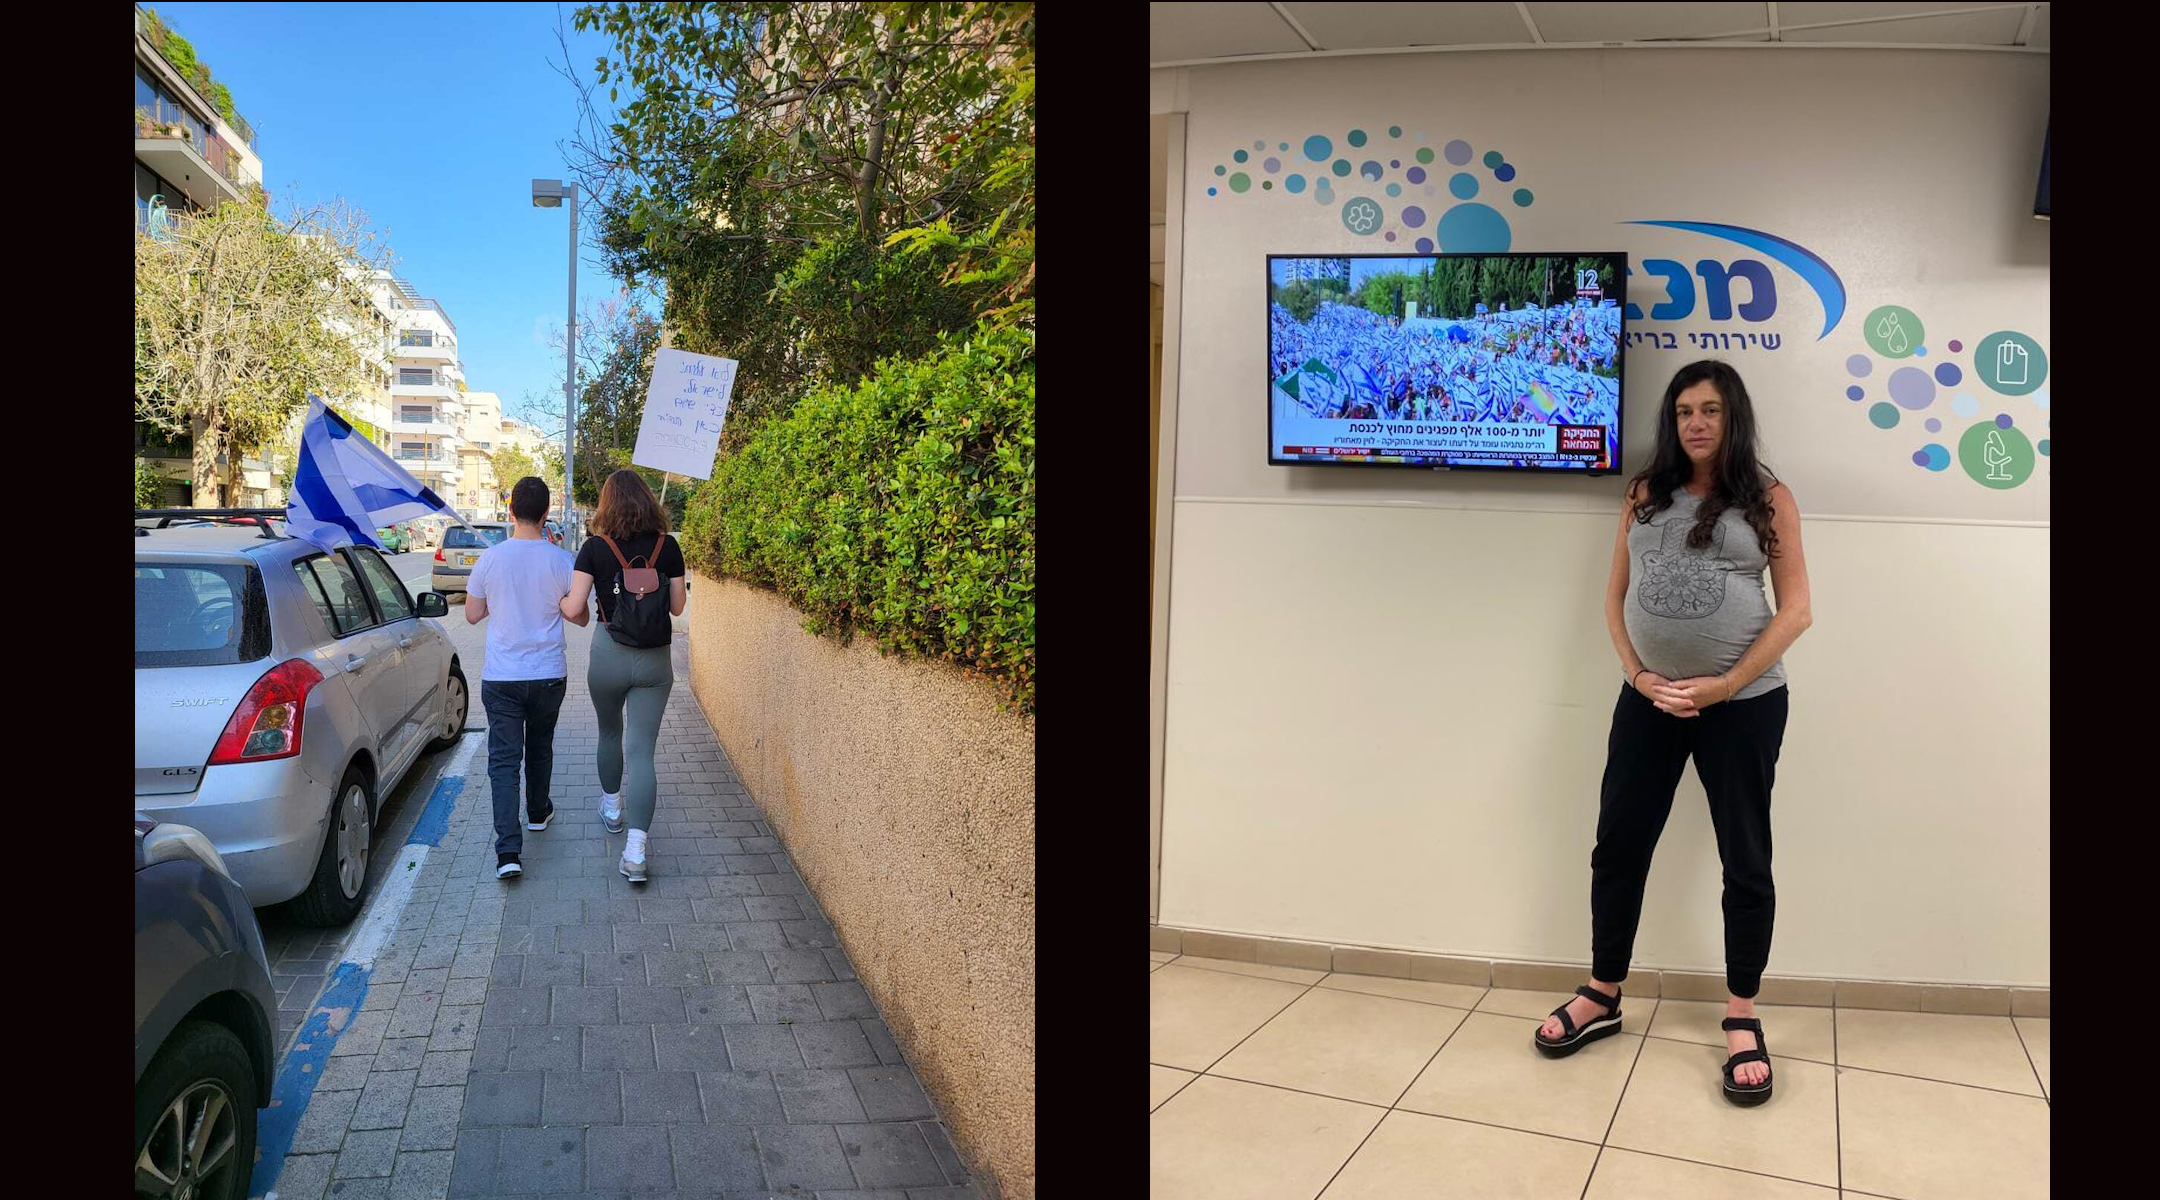 Yariv and Daria, left, walk in Tel Aviv after participating in anti-government protests on Monday, March 27, 2023; at right, Natalie Solomon said her trip to a high-risk pregnancy clinic took more than four times longer than normal because of the protests. (Deborah Danan)